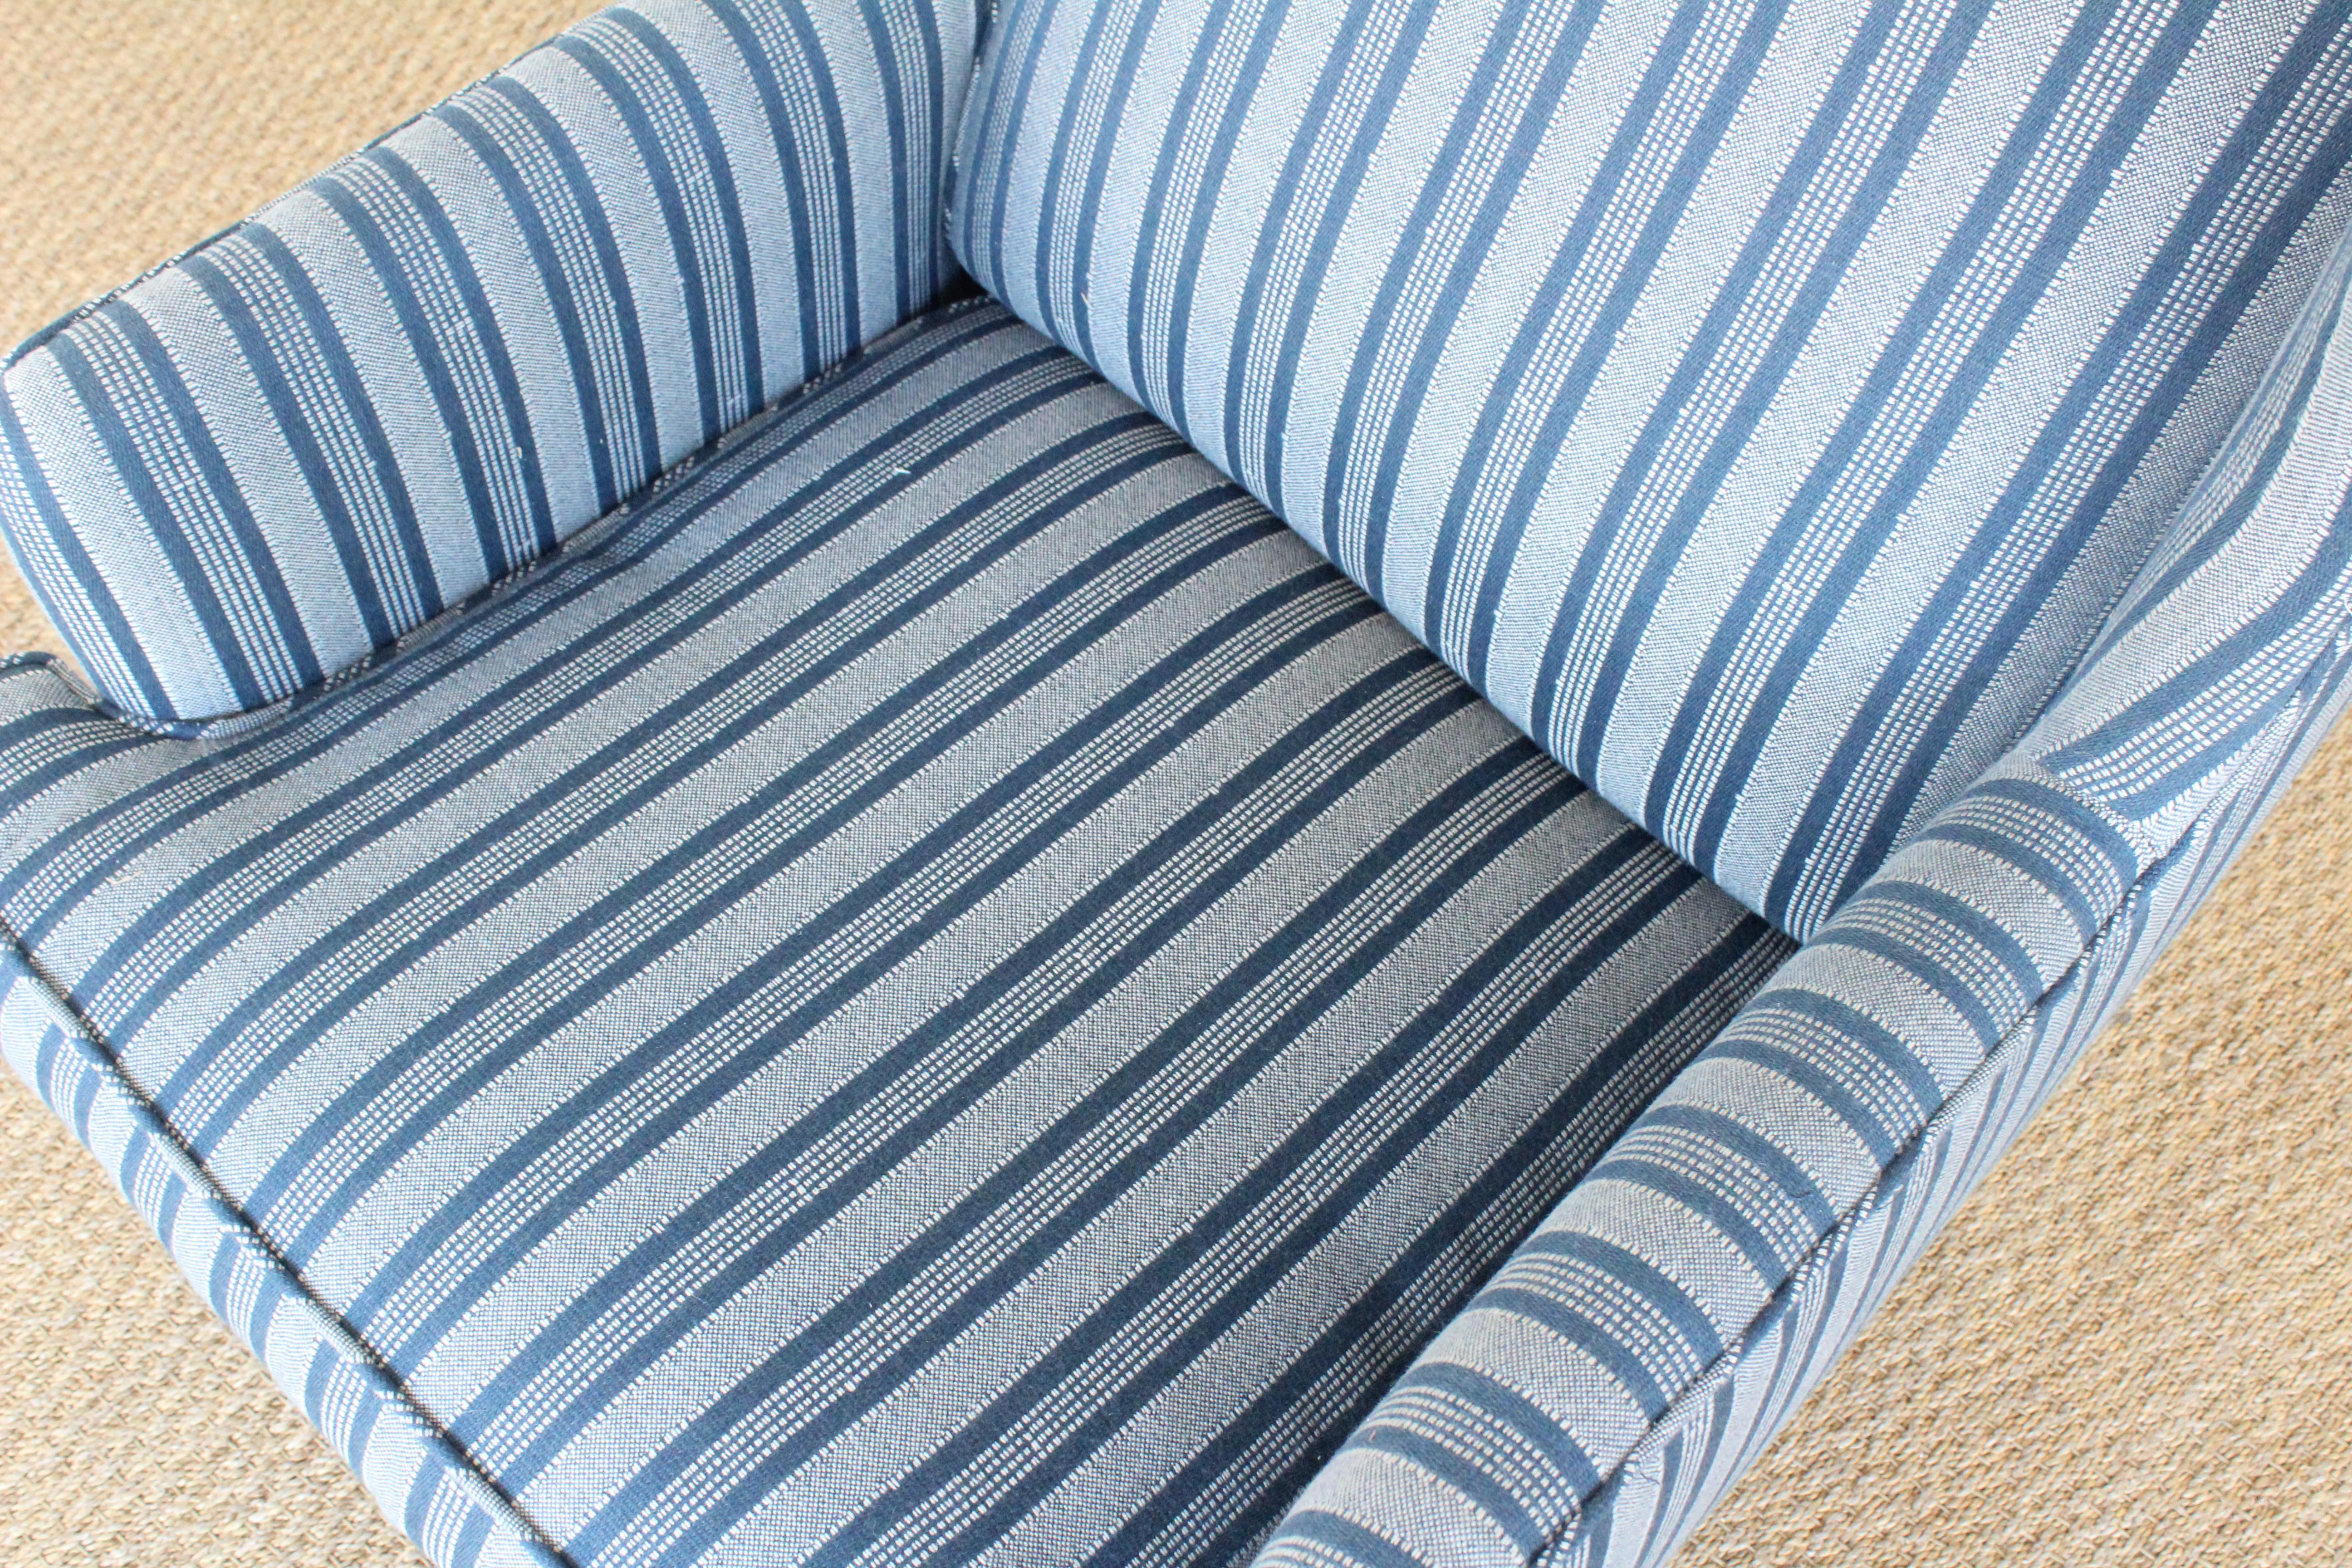 1950s Danish High Back Wing Chair Upholstered in Peter Dunham Textiles Fabric 7